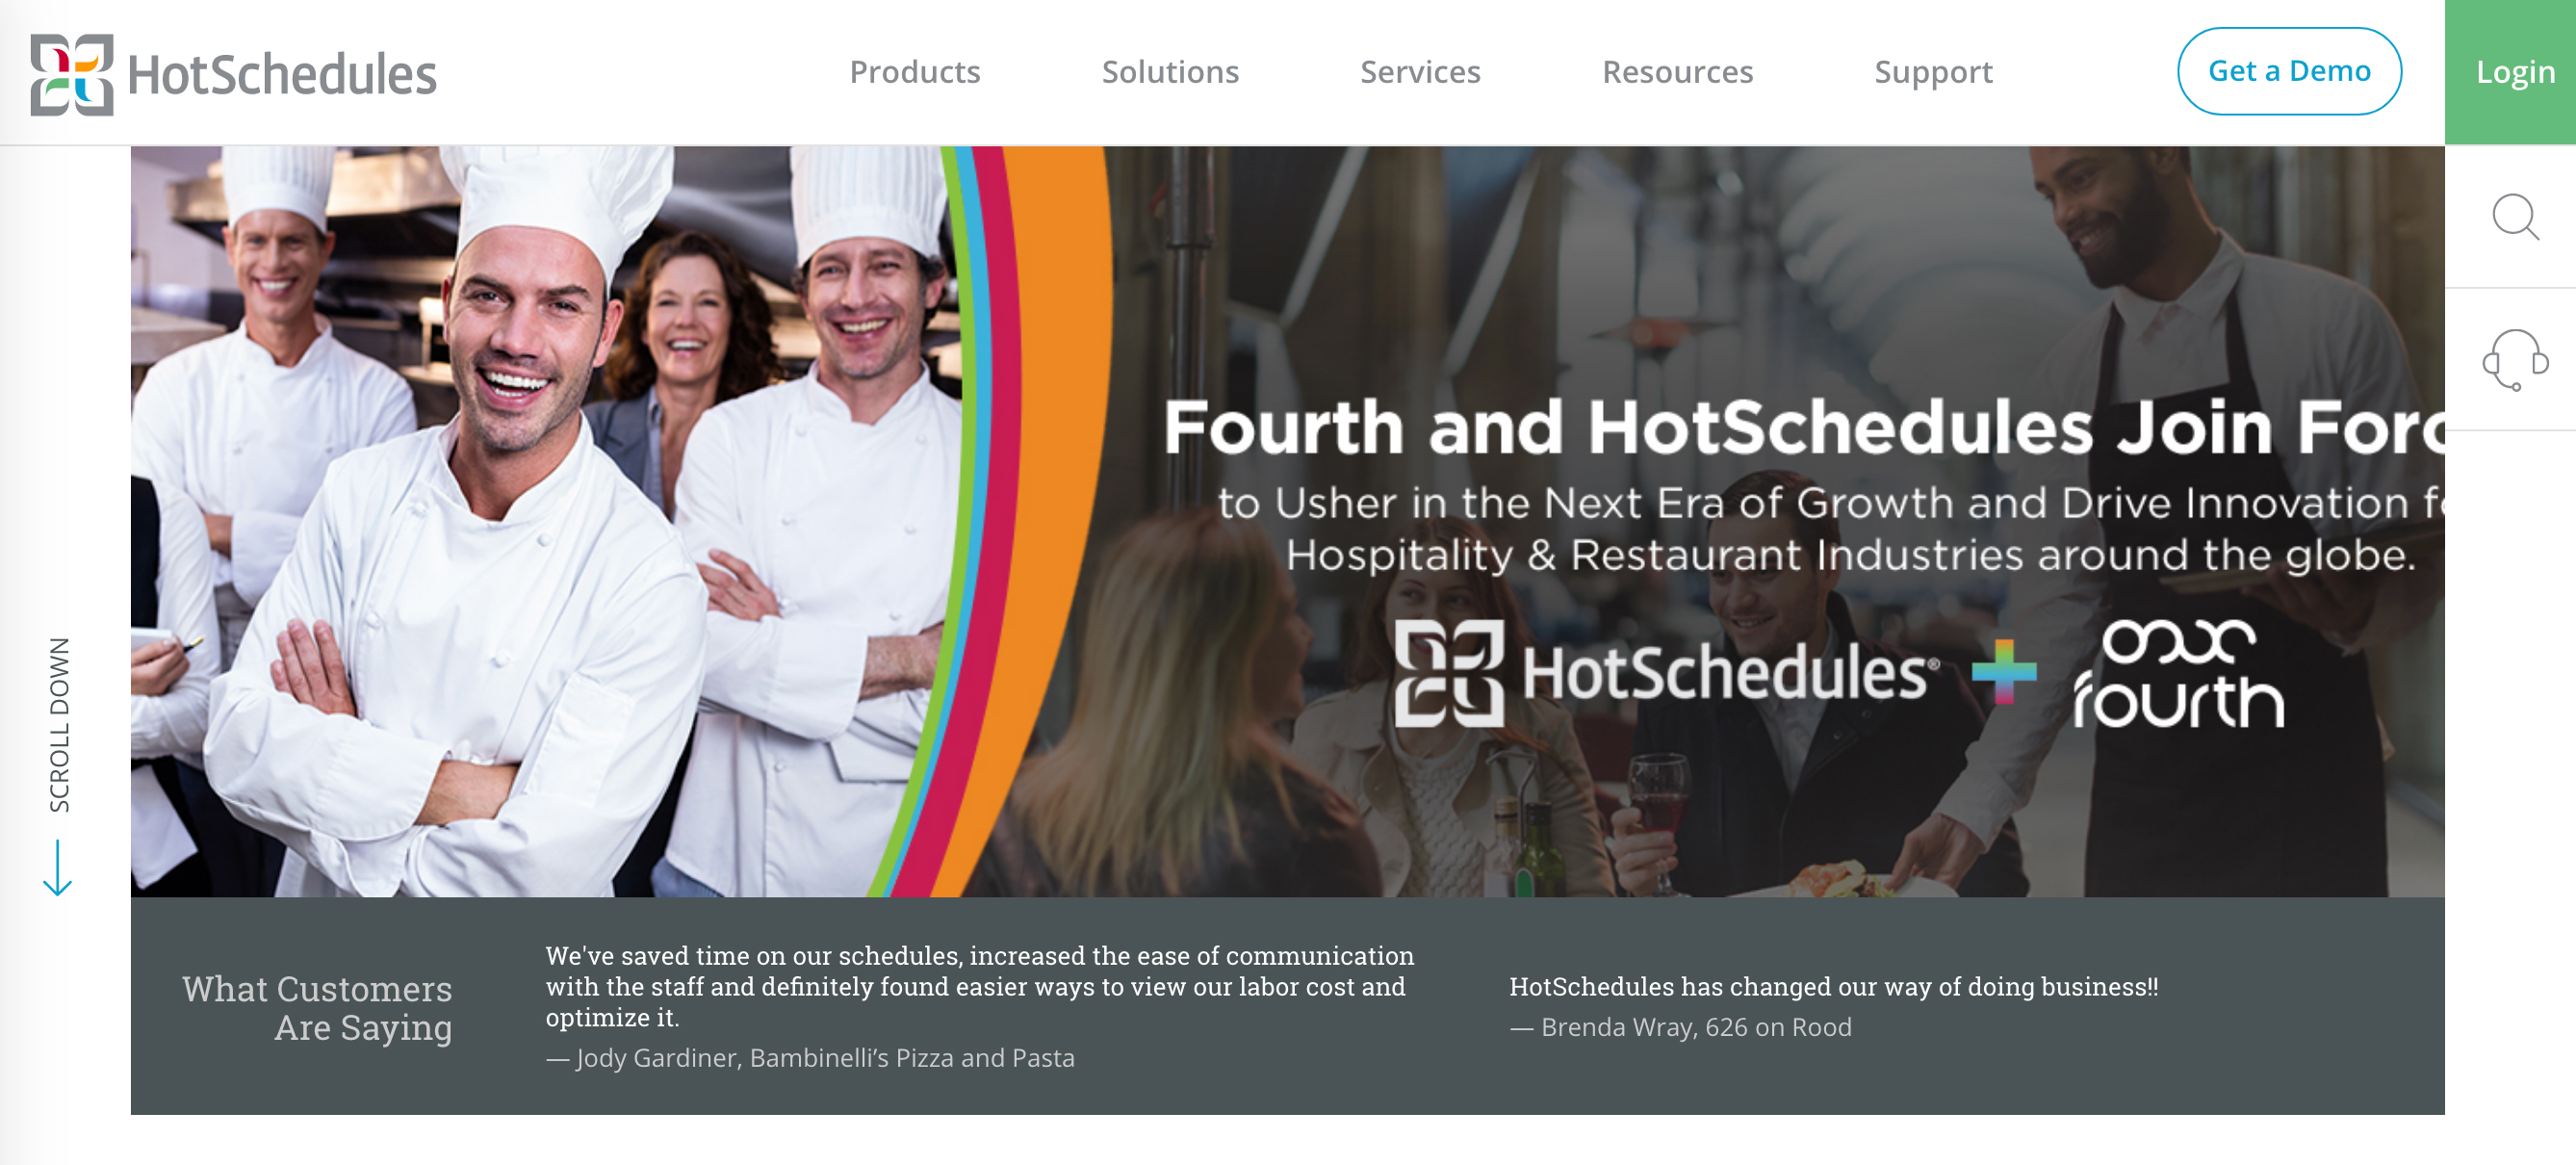 HotSchedules Fourth join forces